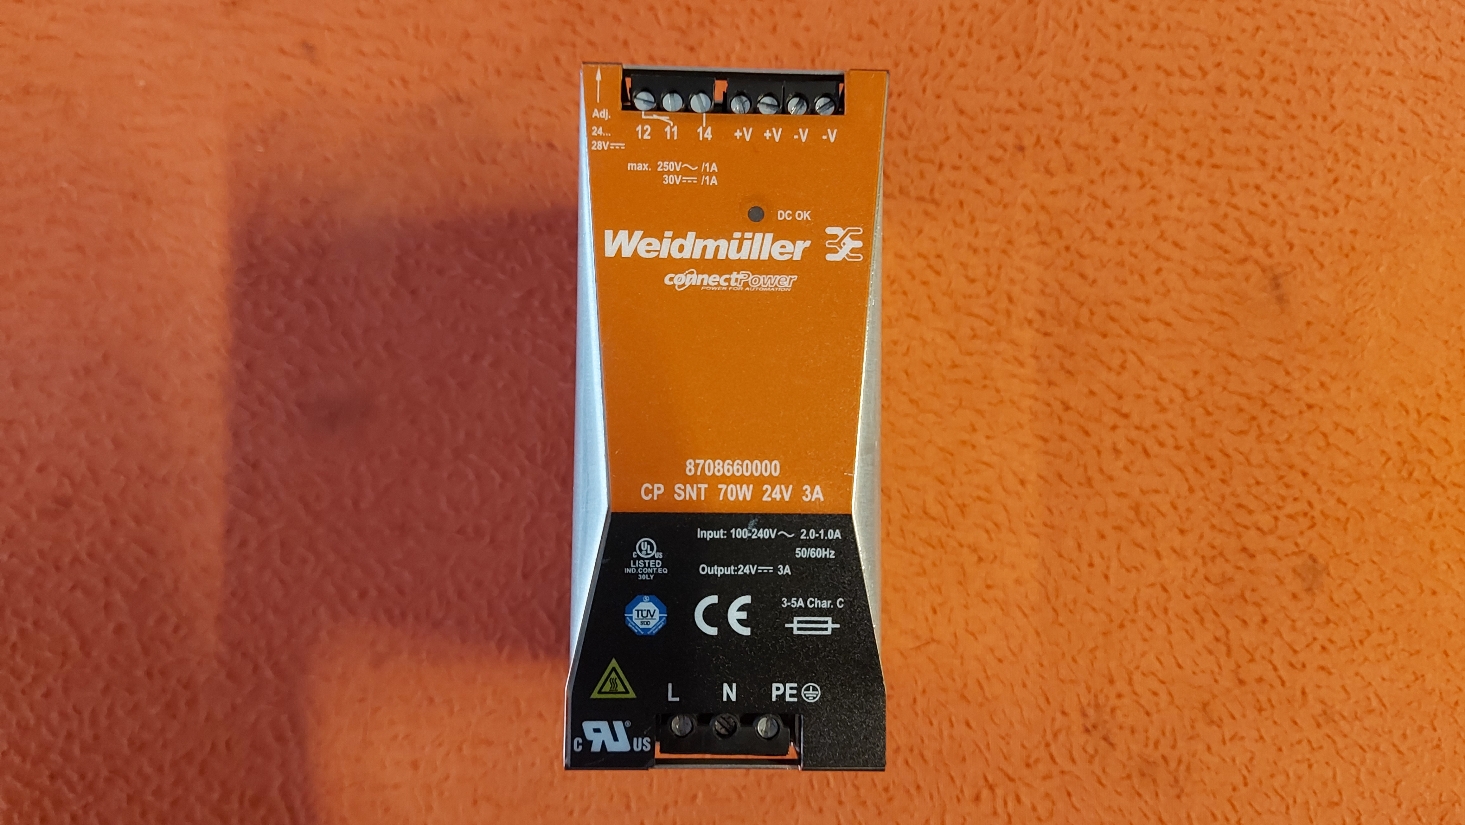 WEİDMÜLLER 8708660000 CP SNT 70W 24V 3A CONNECT POWER CONNECTPOWER